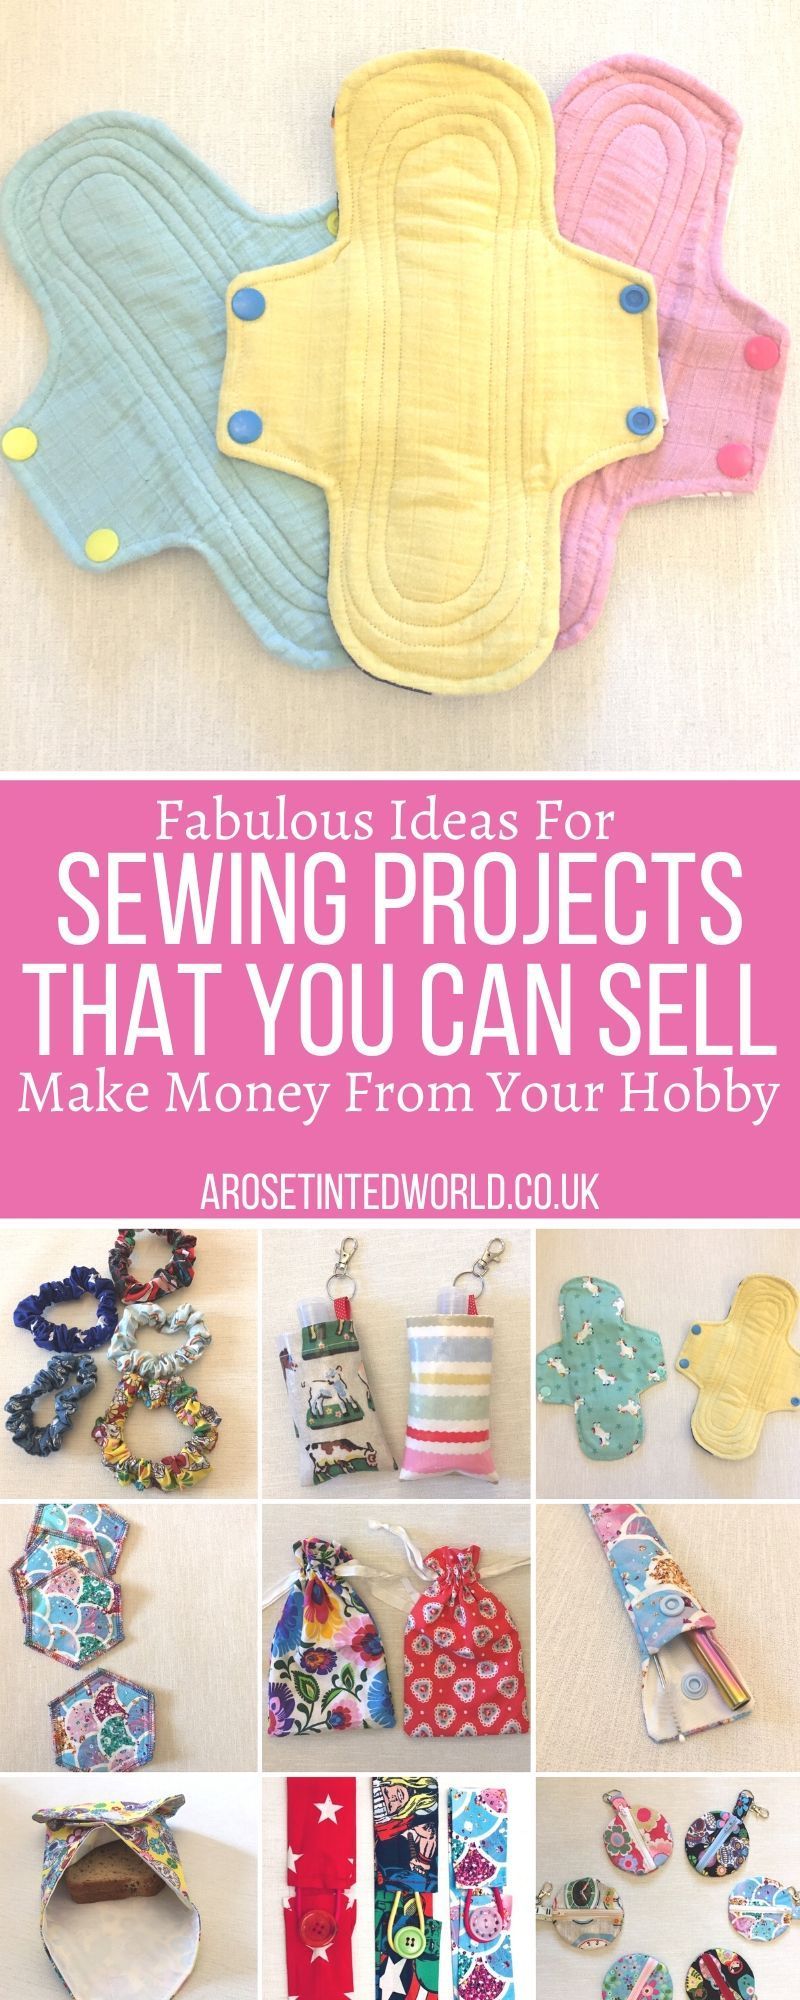 Sewing Projects That You Can Sell - Sewing Projects That You Can Sell -   17 fabric crafts to sell gift ideas